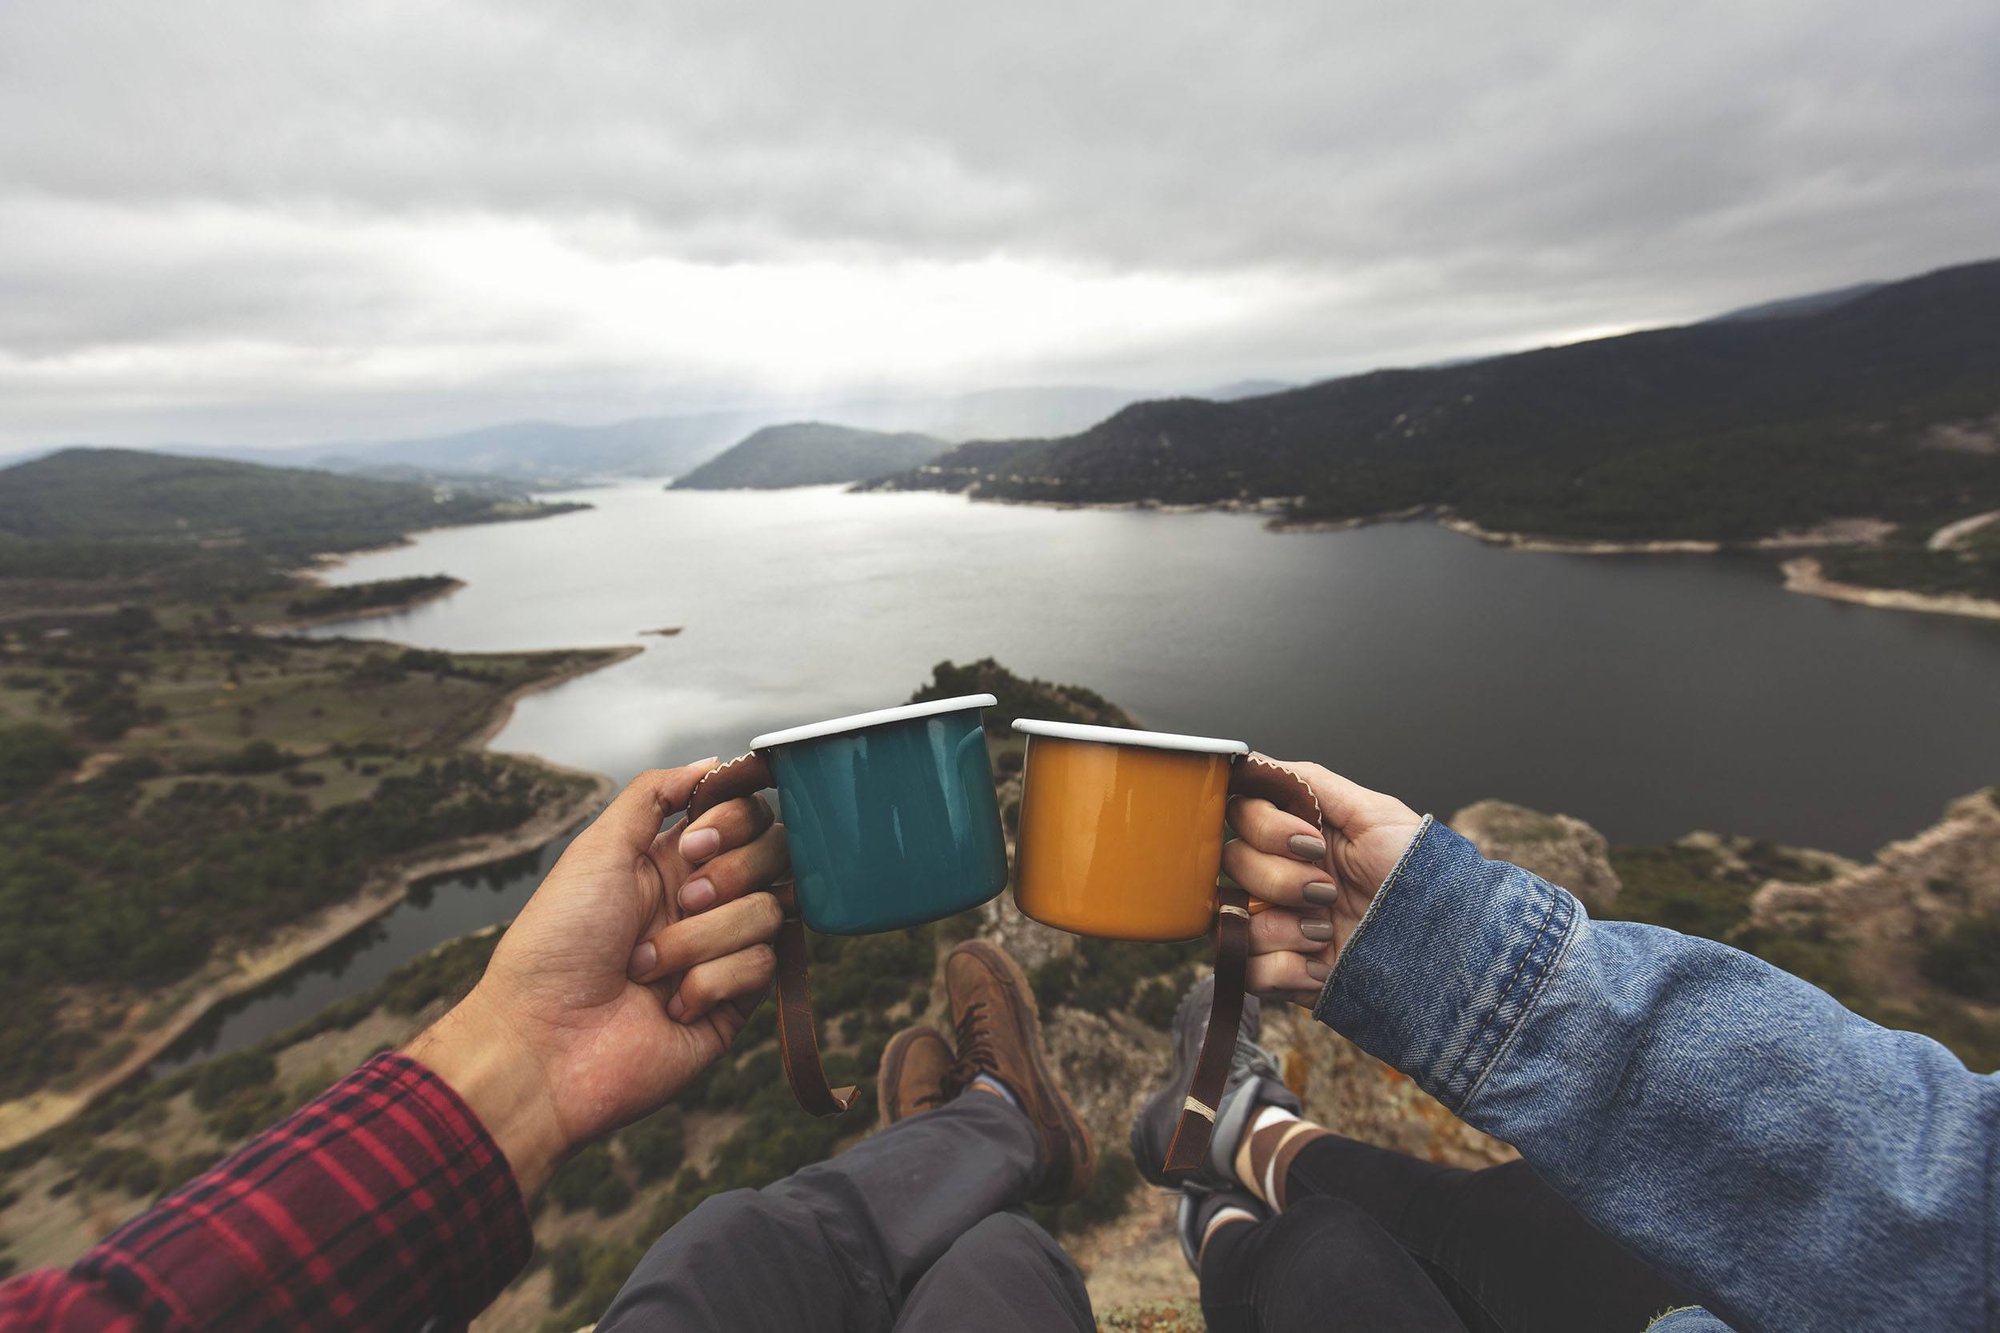 5 Rituals to Reconnect in Your Relationship